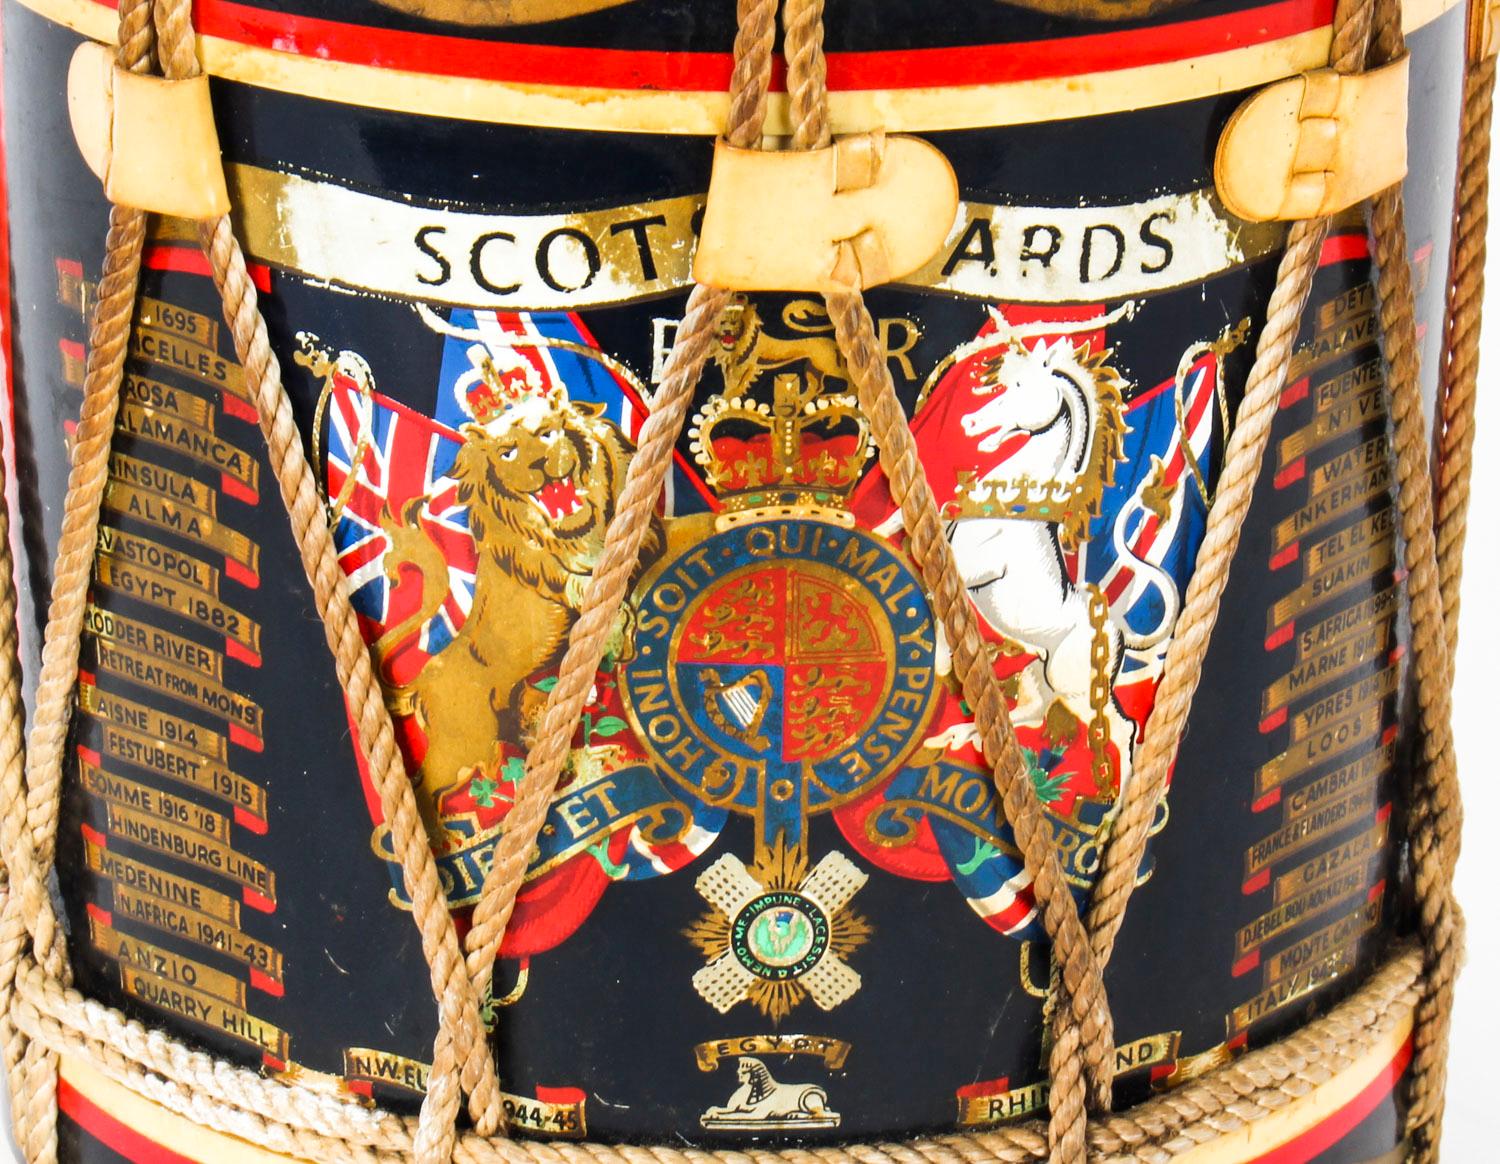 This is an elegant vintage ice bucket with lid, in the form of a military drum, dating from the mid-20th century.

The drum features a black and gold cylindrical body with a large Scots Guards regimental crest to the side and is embellished with